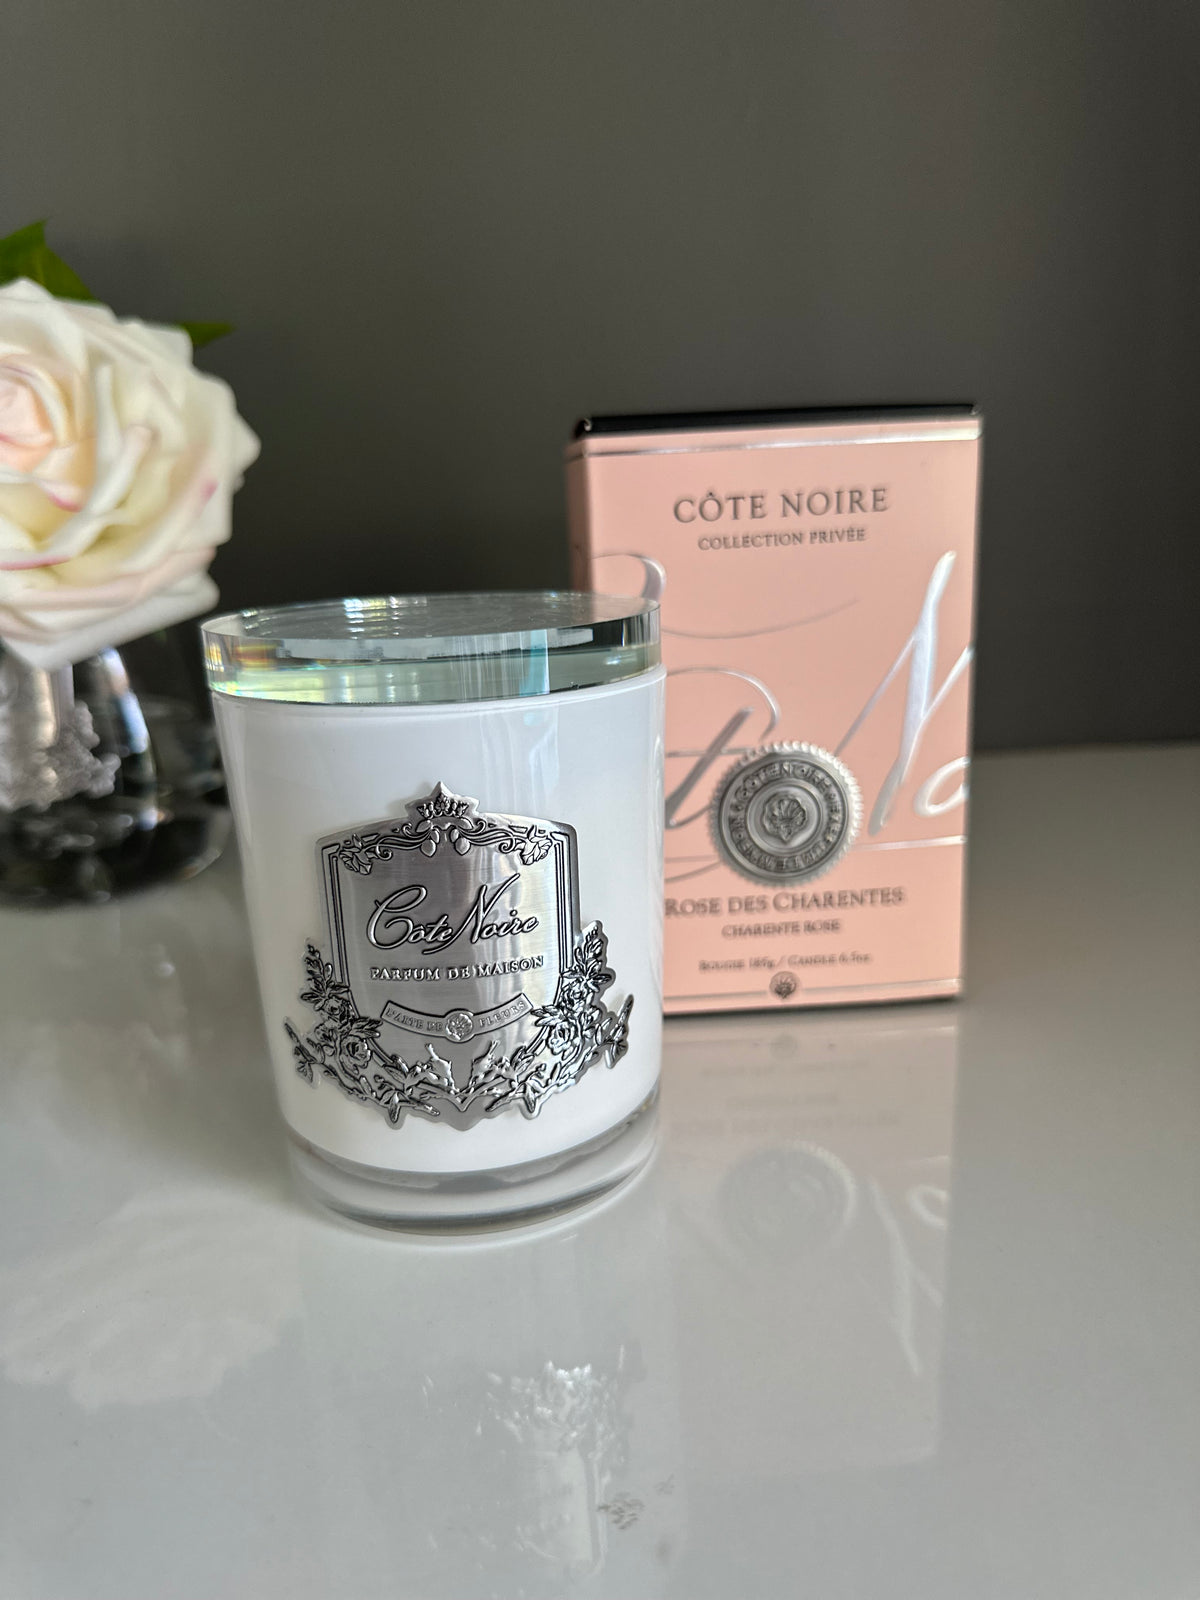 Tear drop tea rose and  luxury candle sympathy gift box.